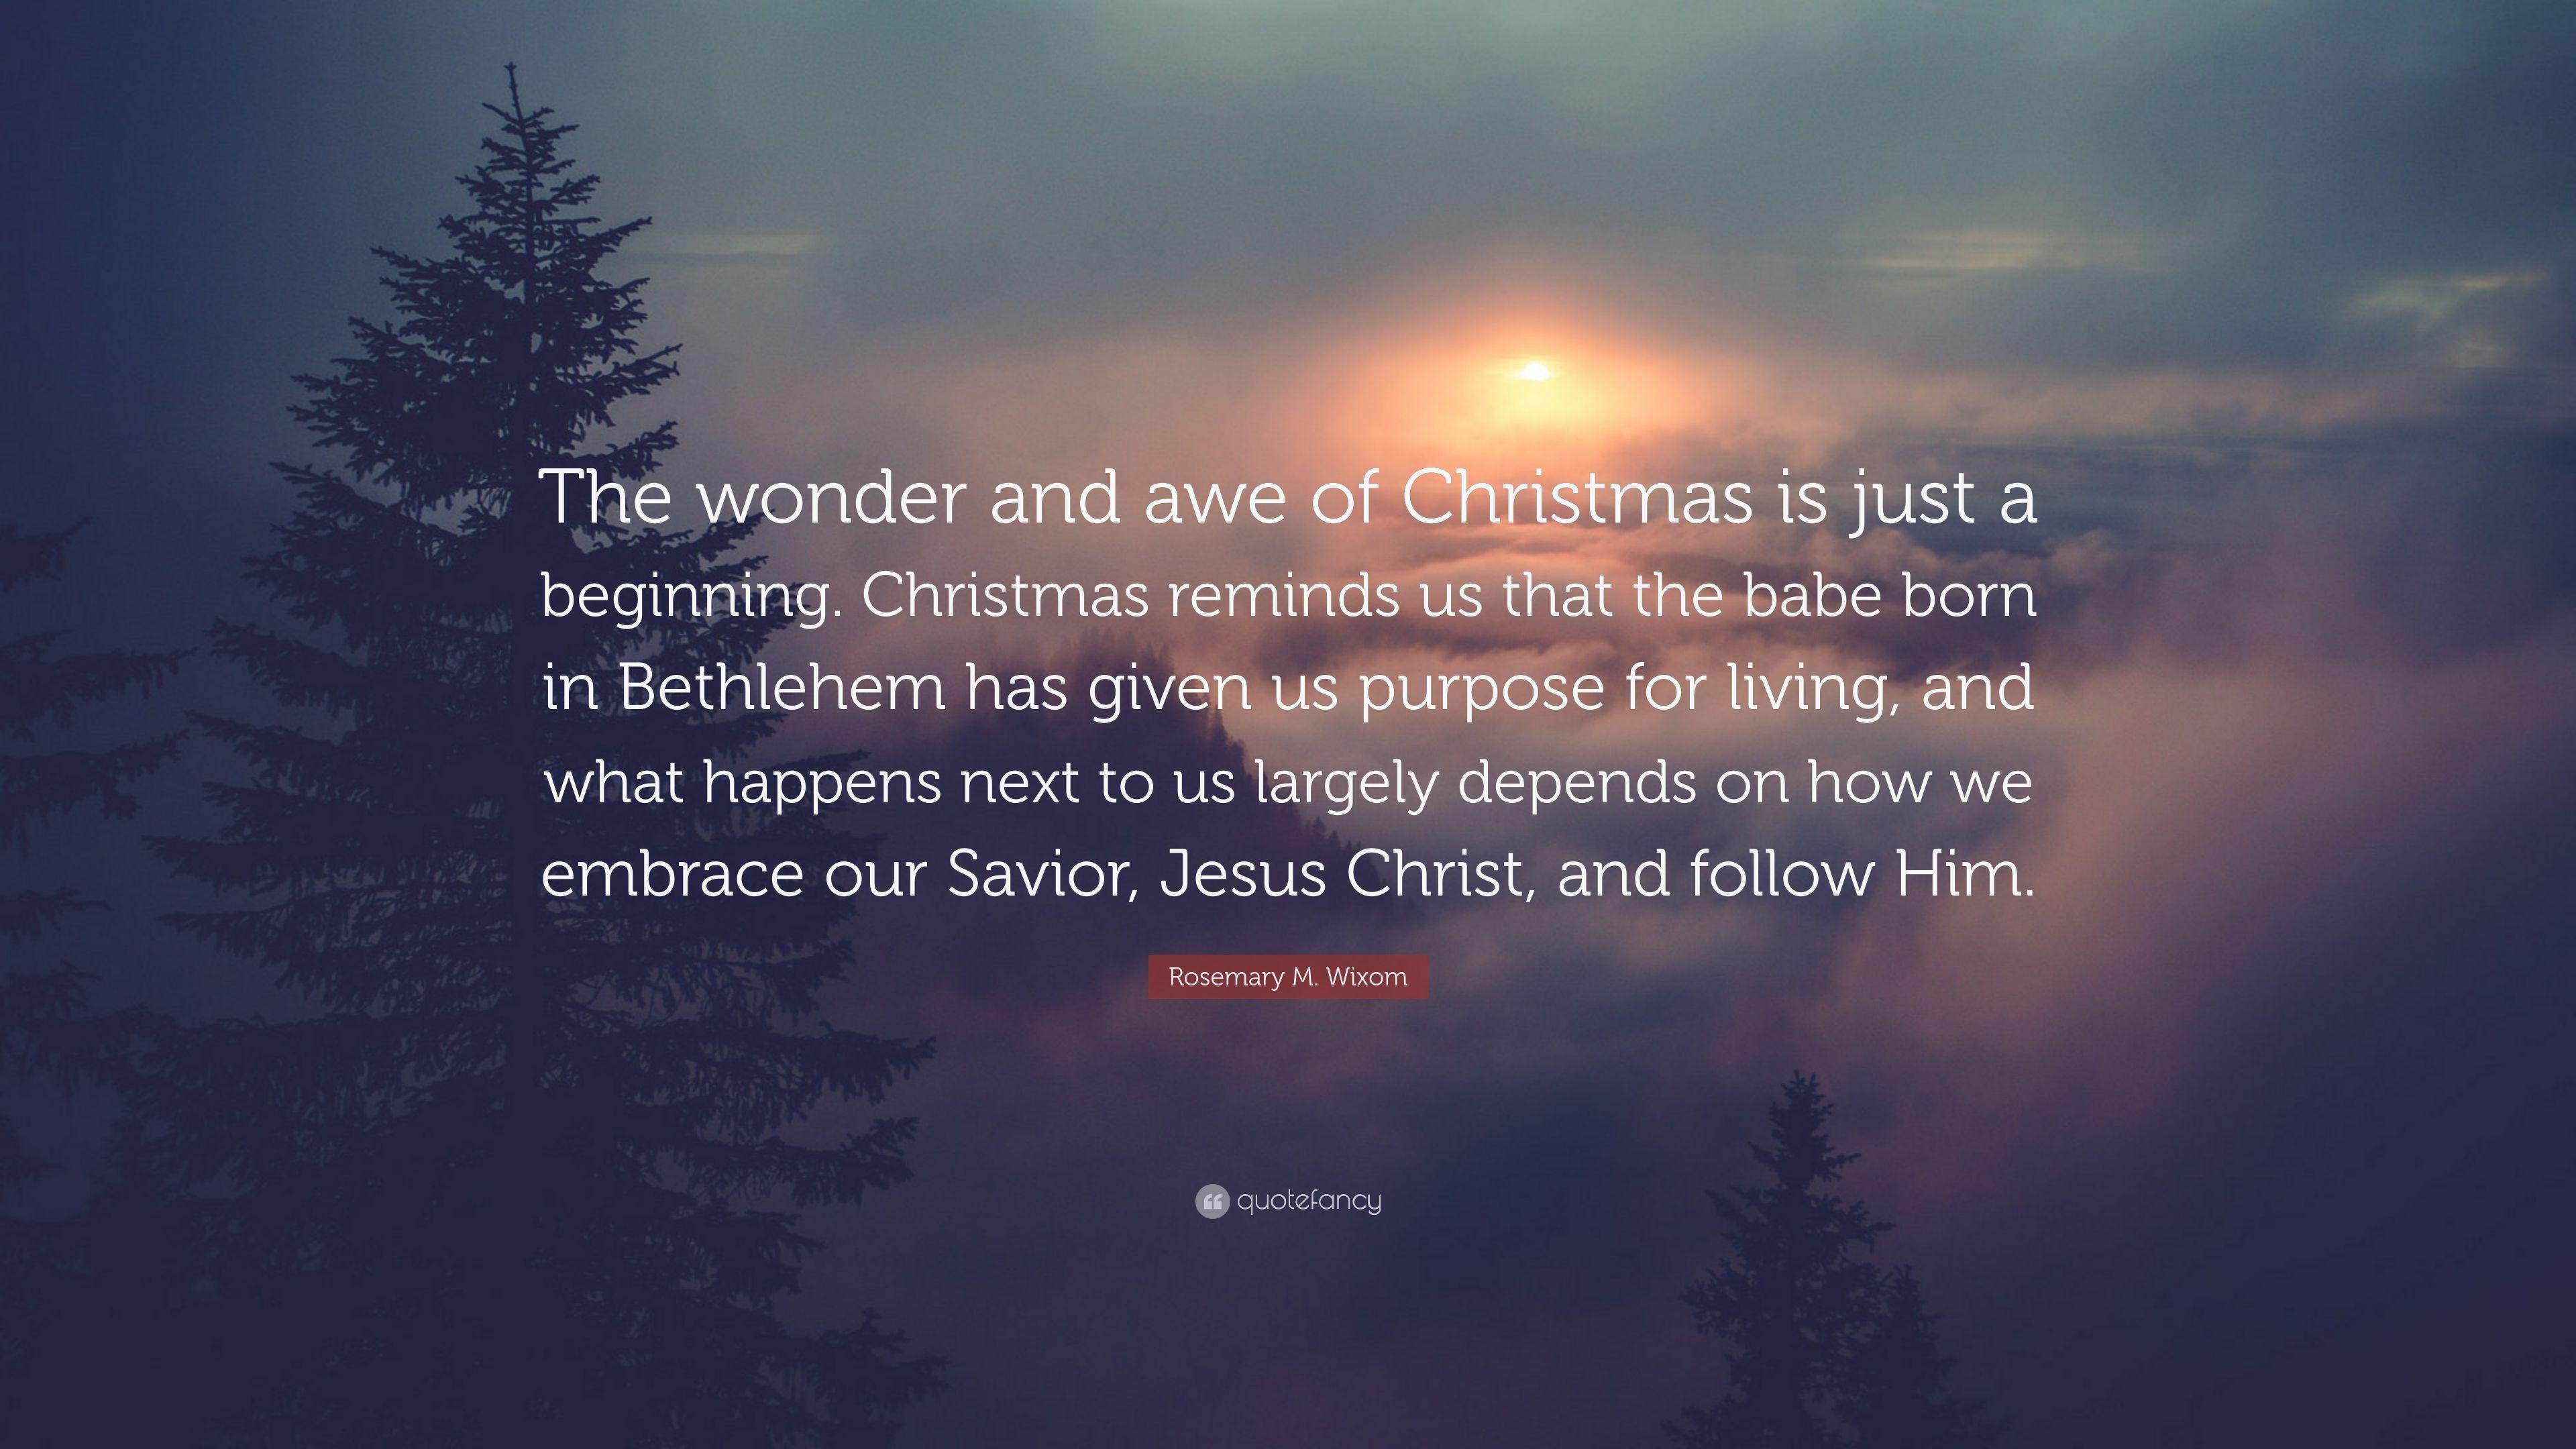 Rosemary M. Wixom Quote: “The wonder and awe of Christmas is just a